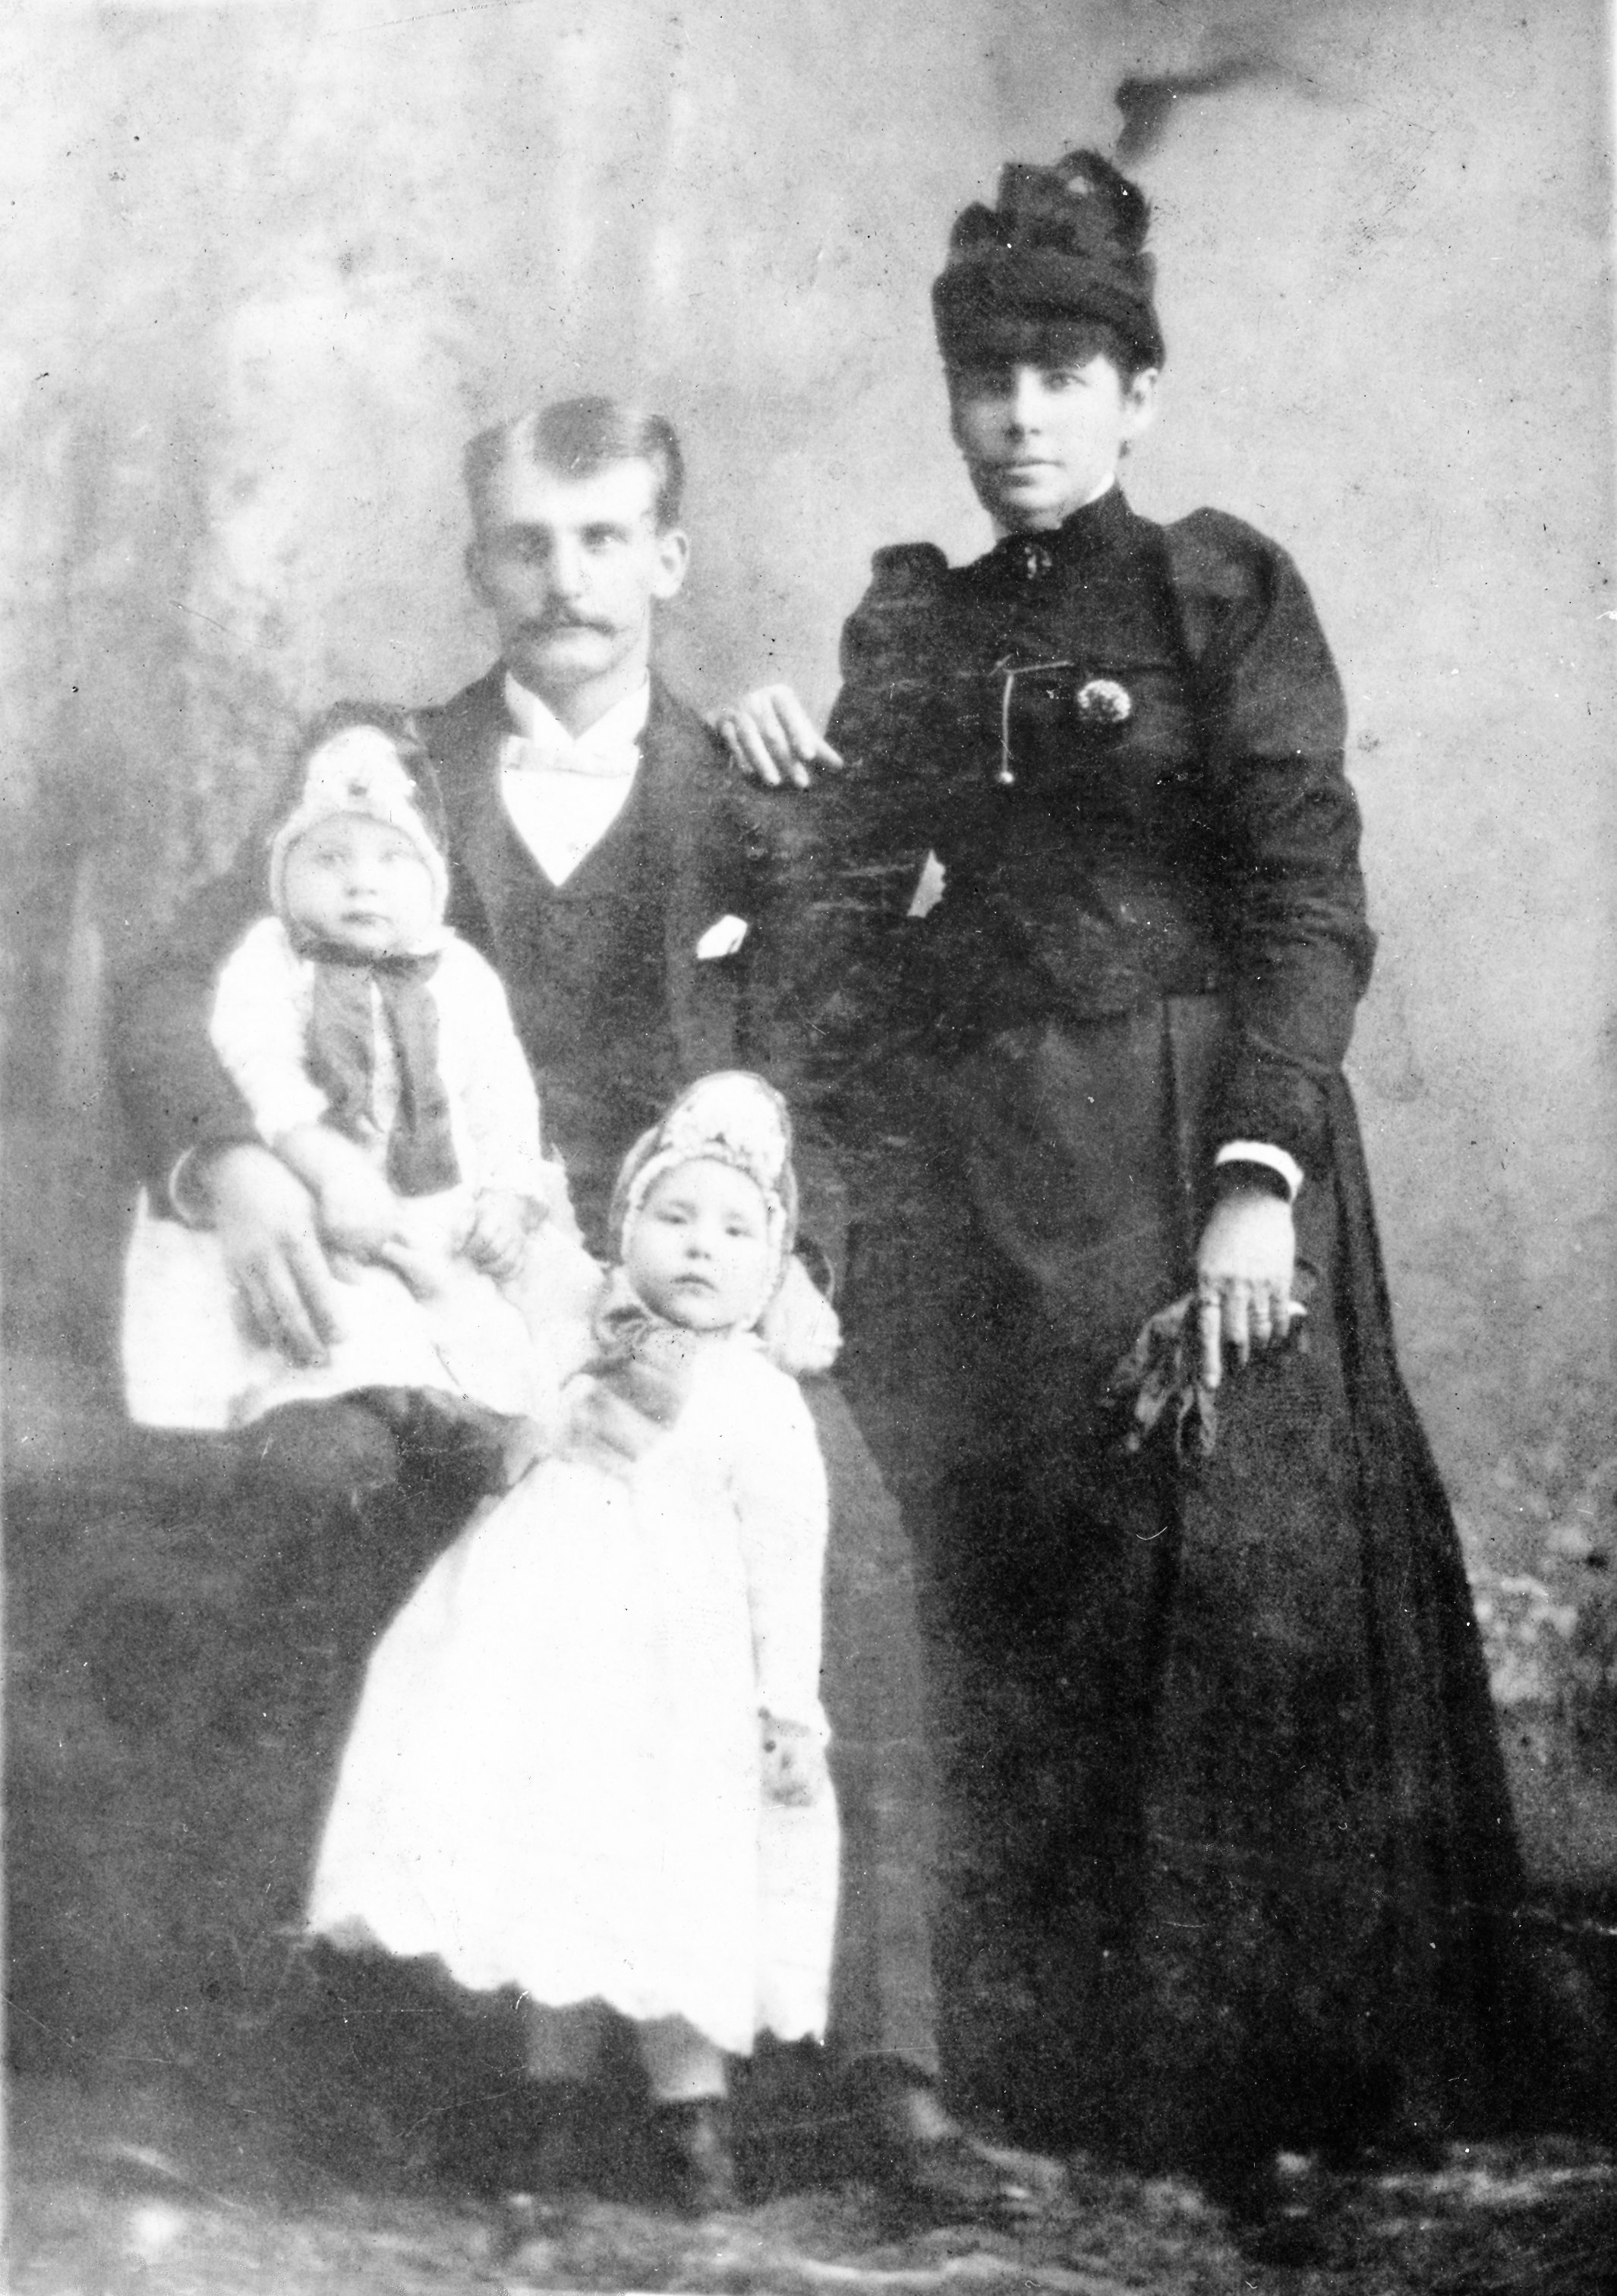 Family portrait in Marietta,Georgia, from 1923. Franklin Kuykendall, Maggie Mae Brooks, Lila Mae and (standing) Mary Louise.